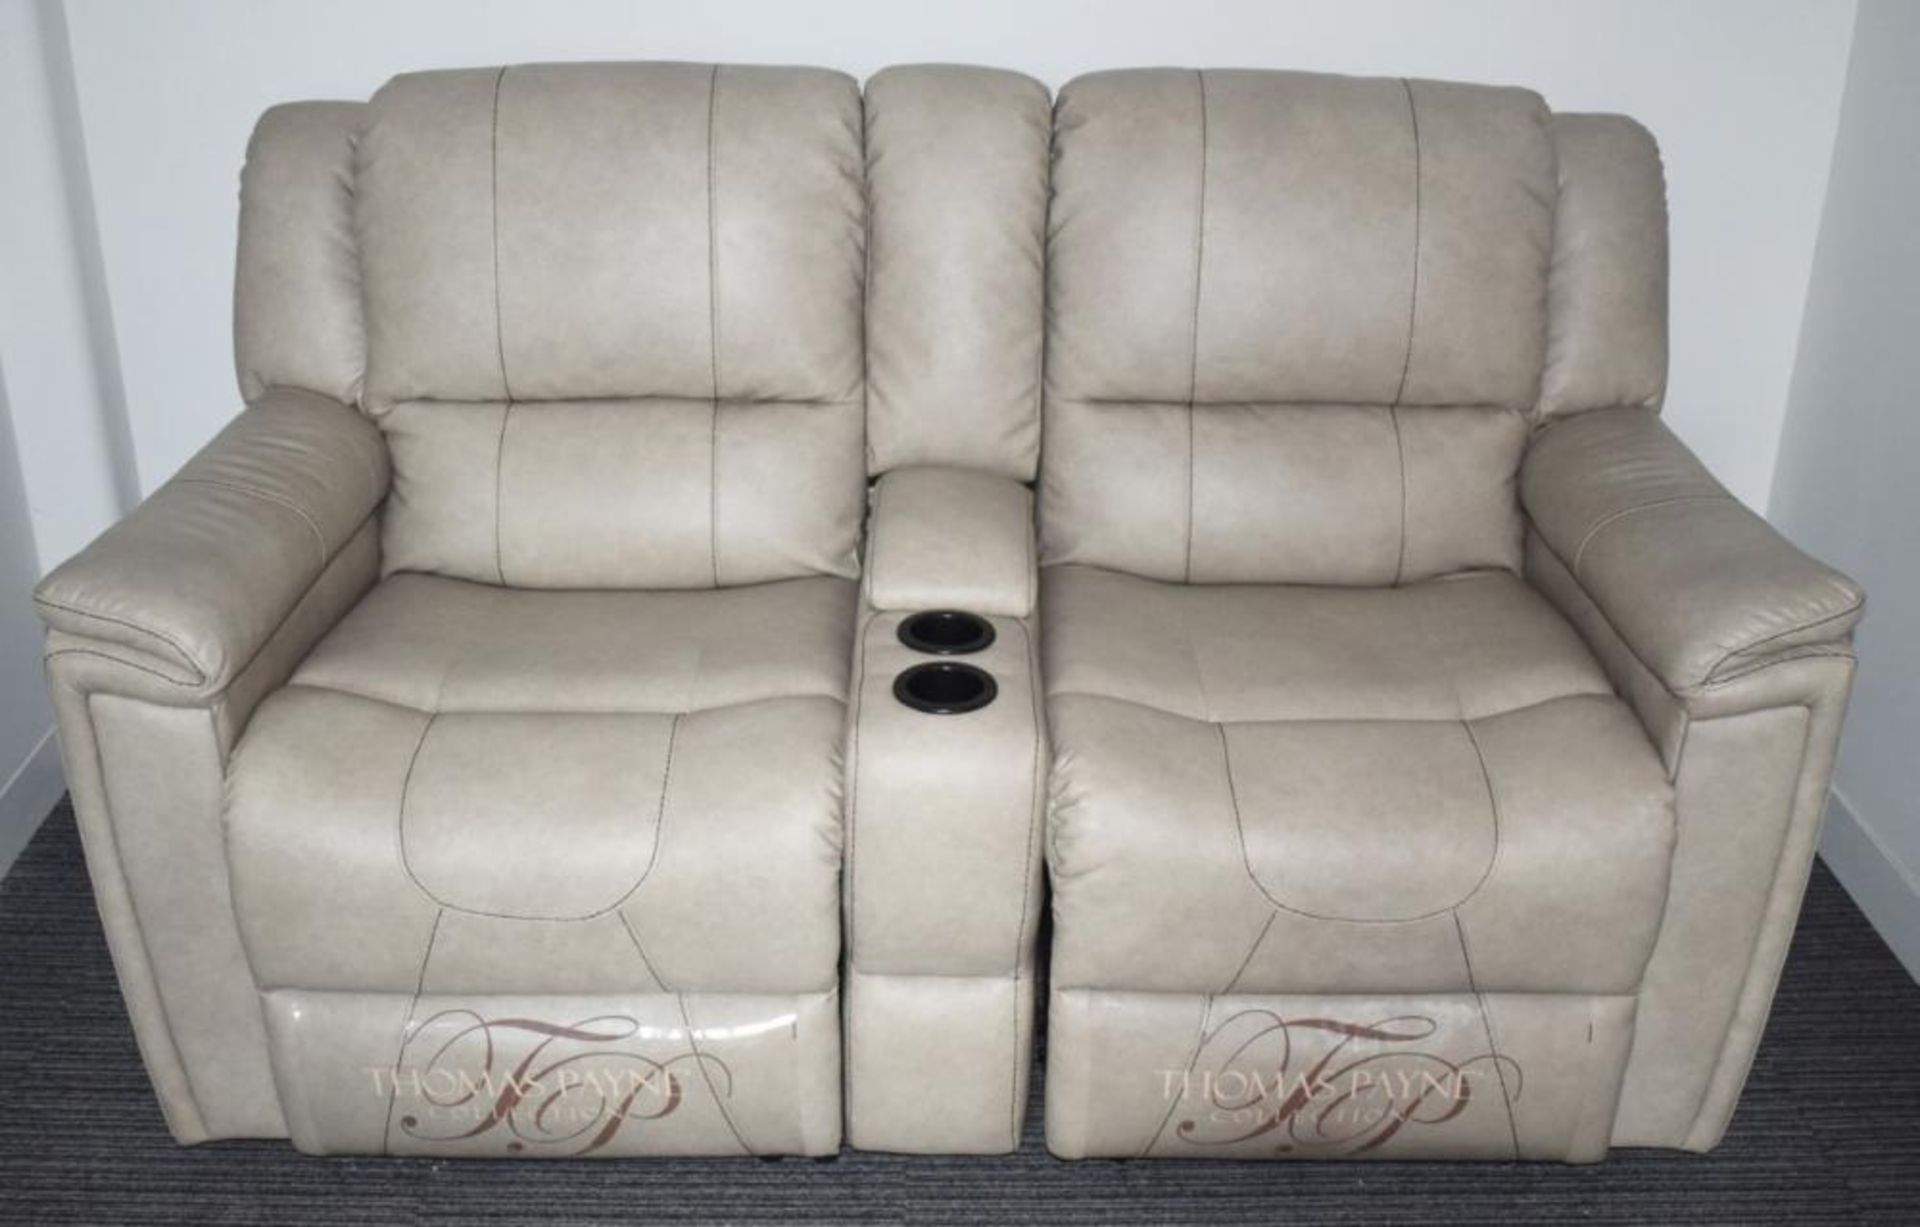 1 x Thomas Payne Reclining Wallhugger Theater Seating Love Seat Couch With Center Console and Grambl - Image 5 of 10